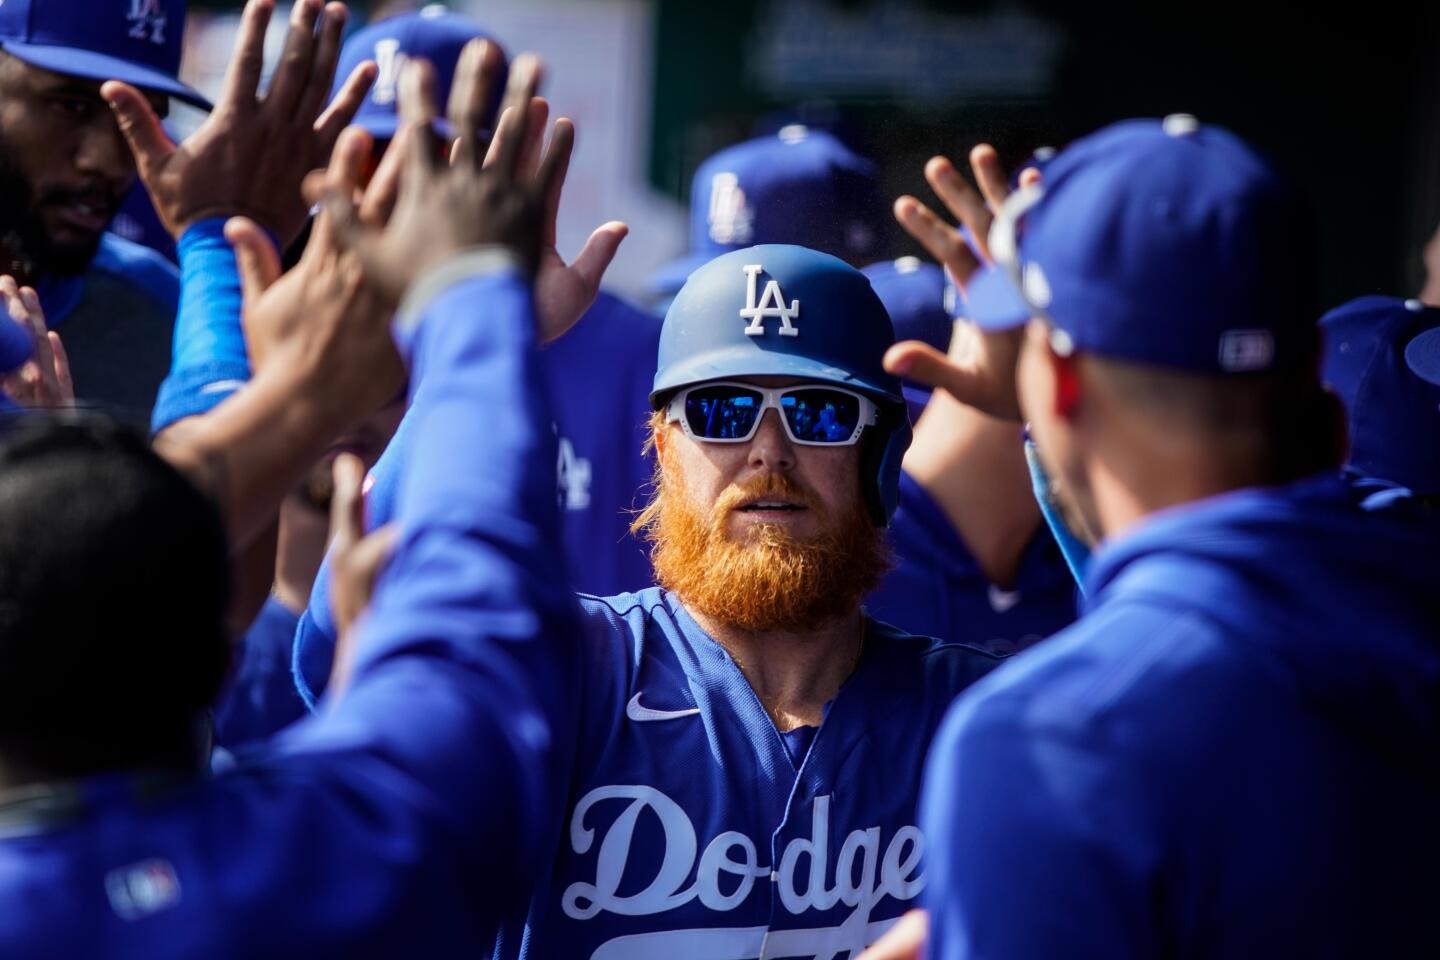 Dodgers third baseman Justin Turner celebrates with his teammates in the dugout after scoring a run during an exhibition game against the Chicago Cubs at Camelback Ranch on Feb. 23, 2020.